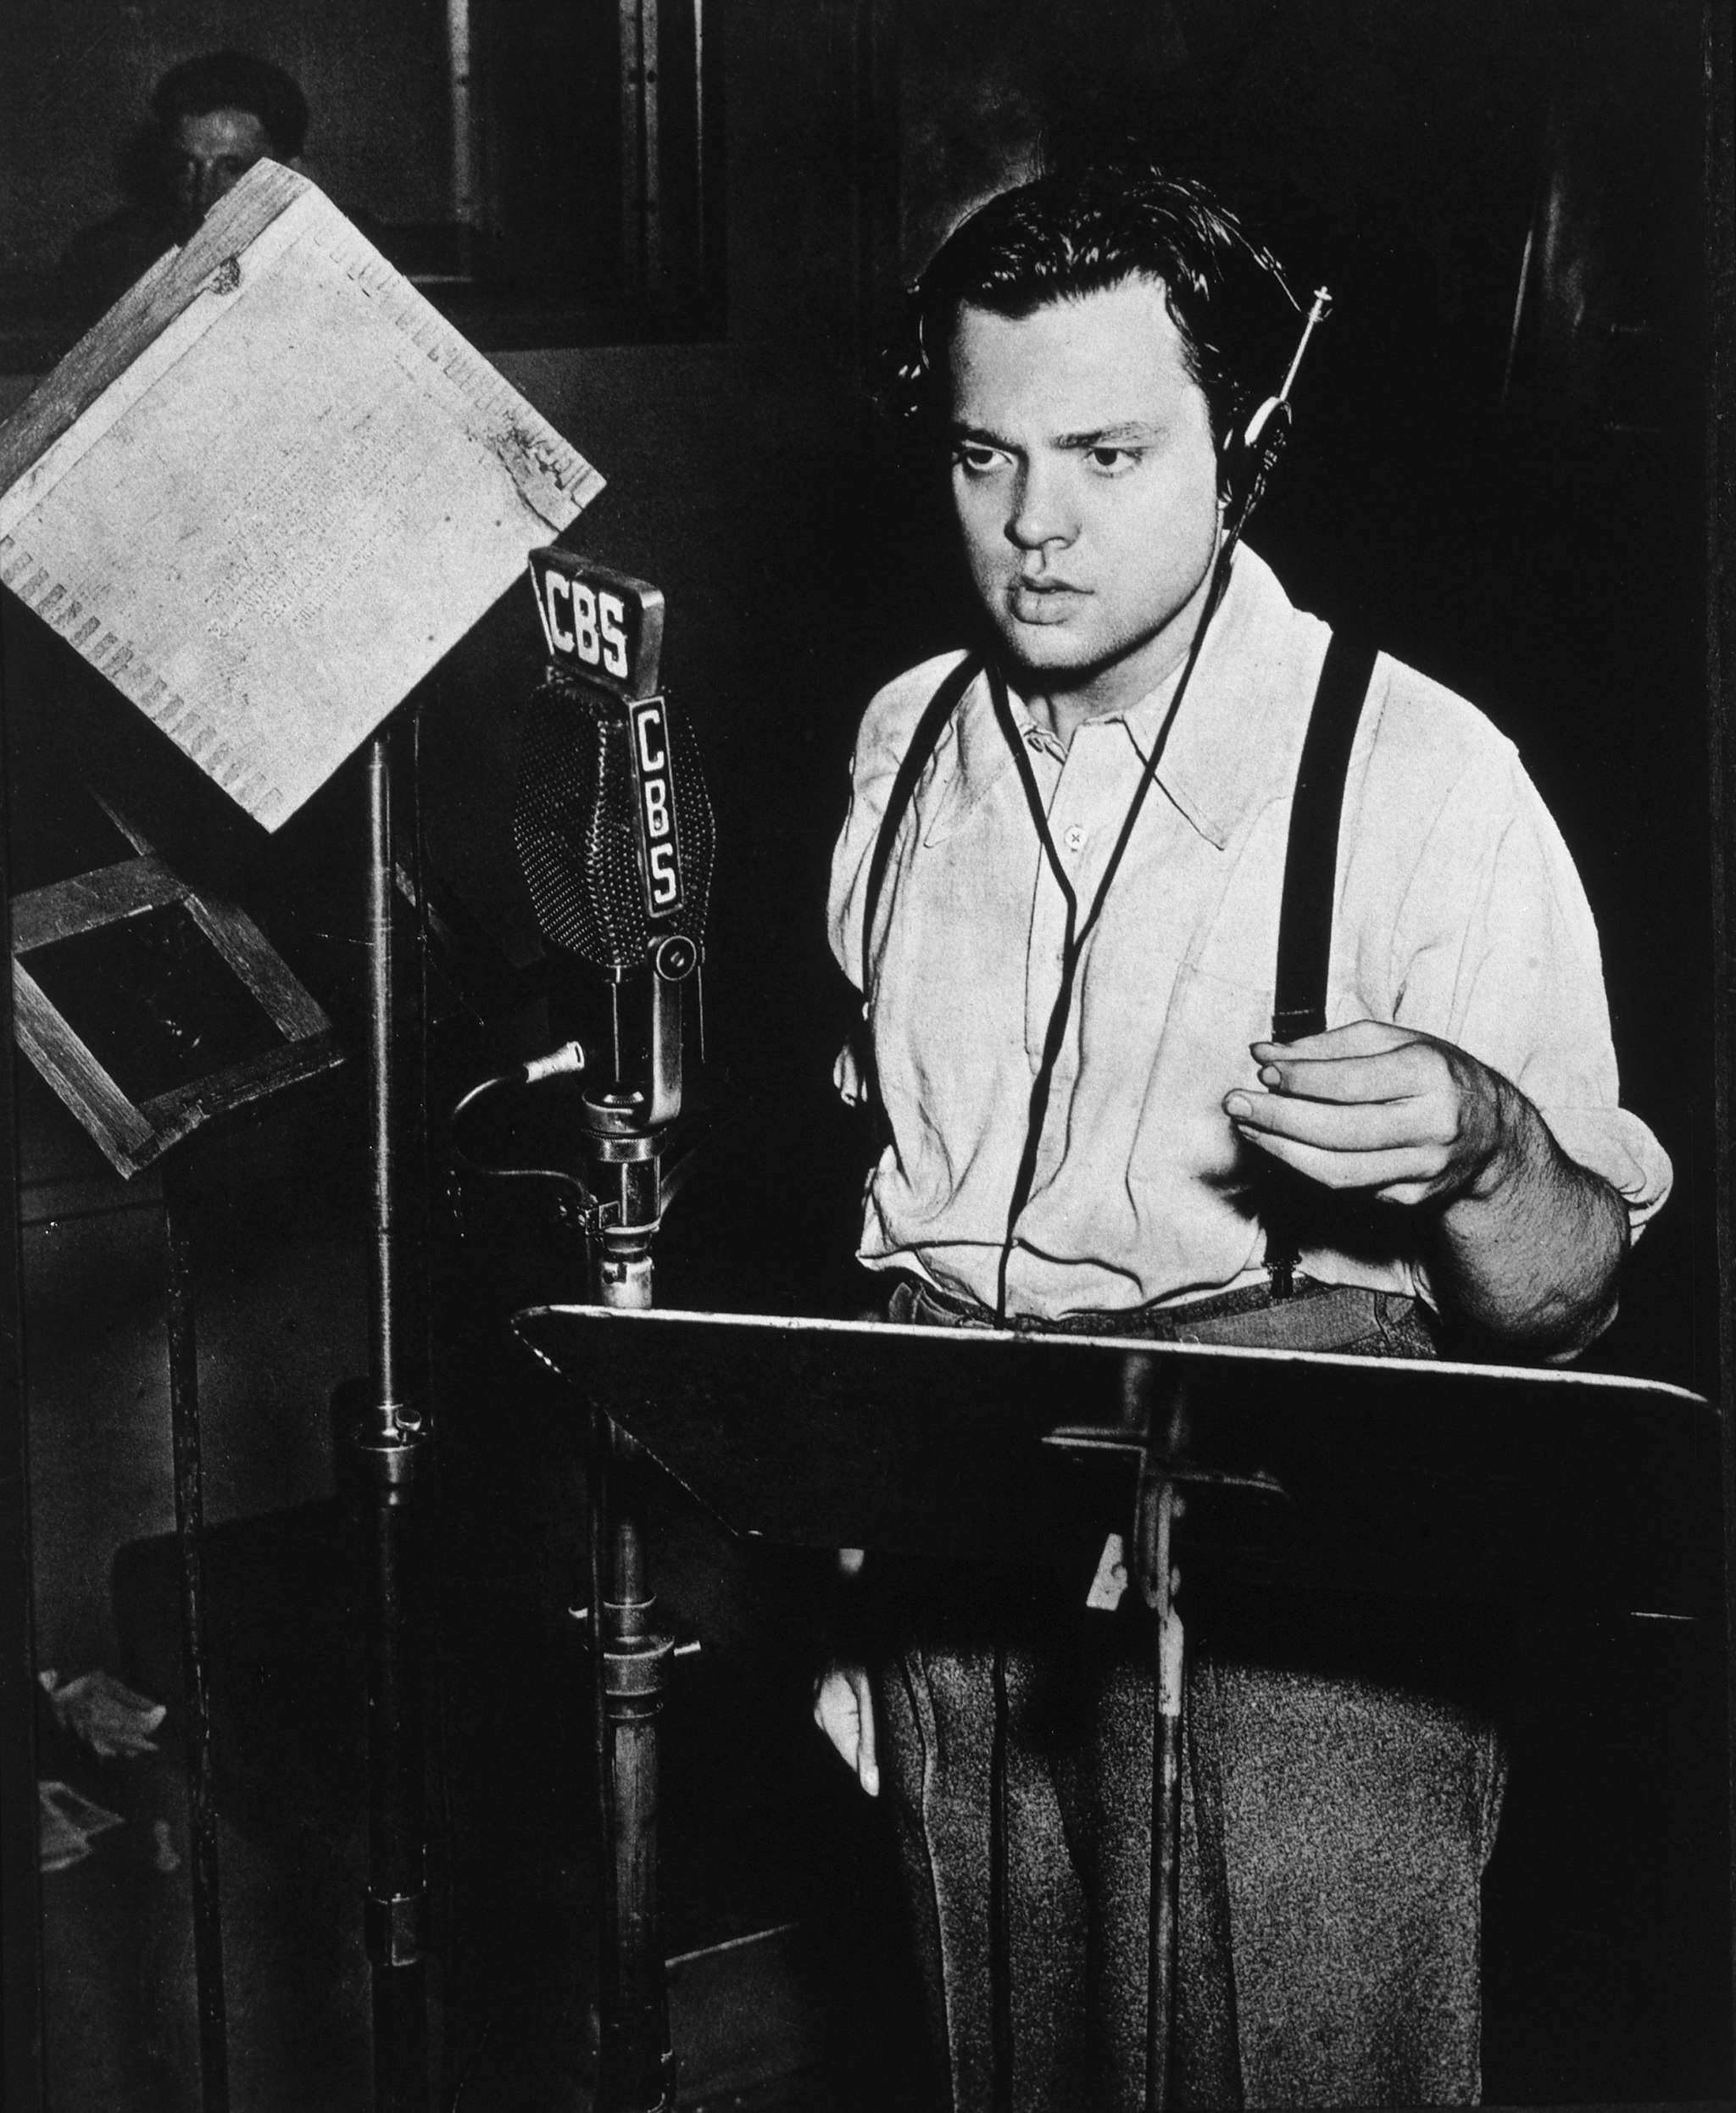 Orson Welles at work in the CBS Radio studio. Photo care of Dallas Dispatch-Journal, October 31, 1938.